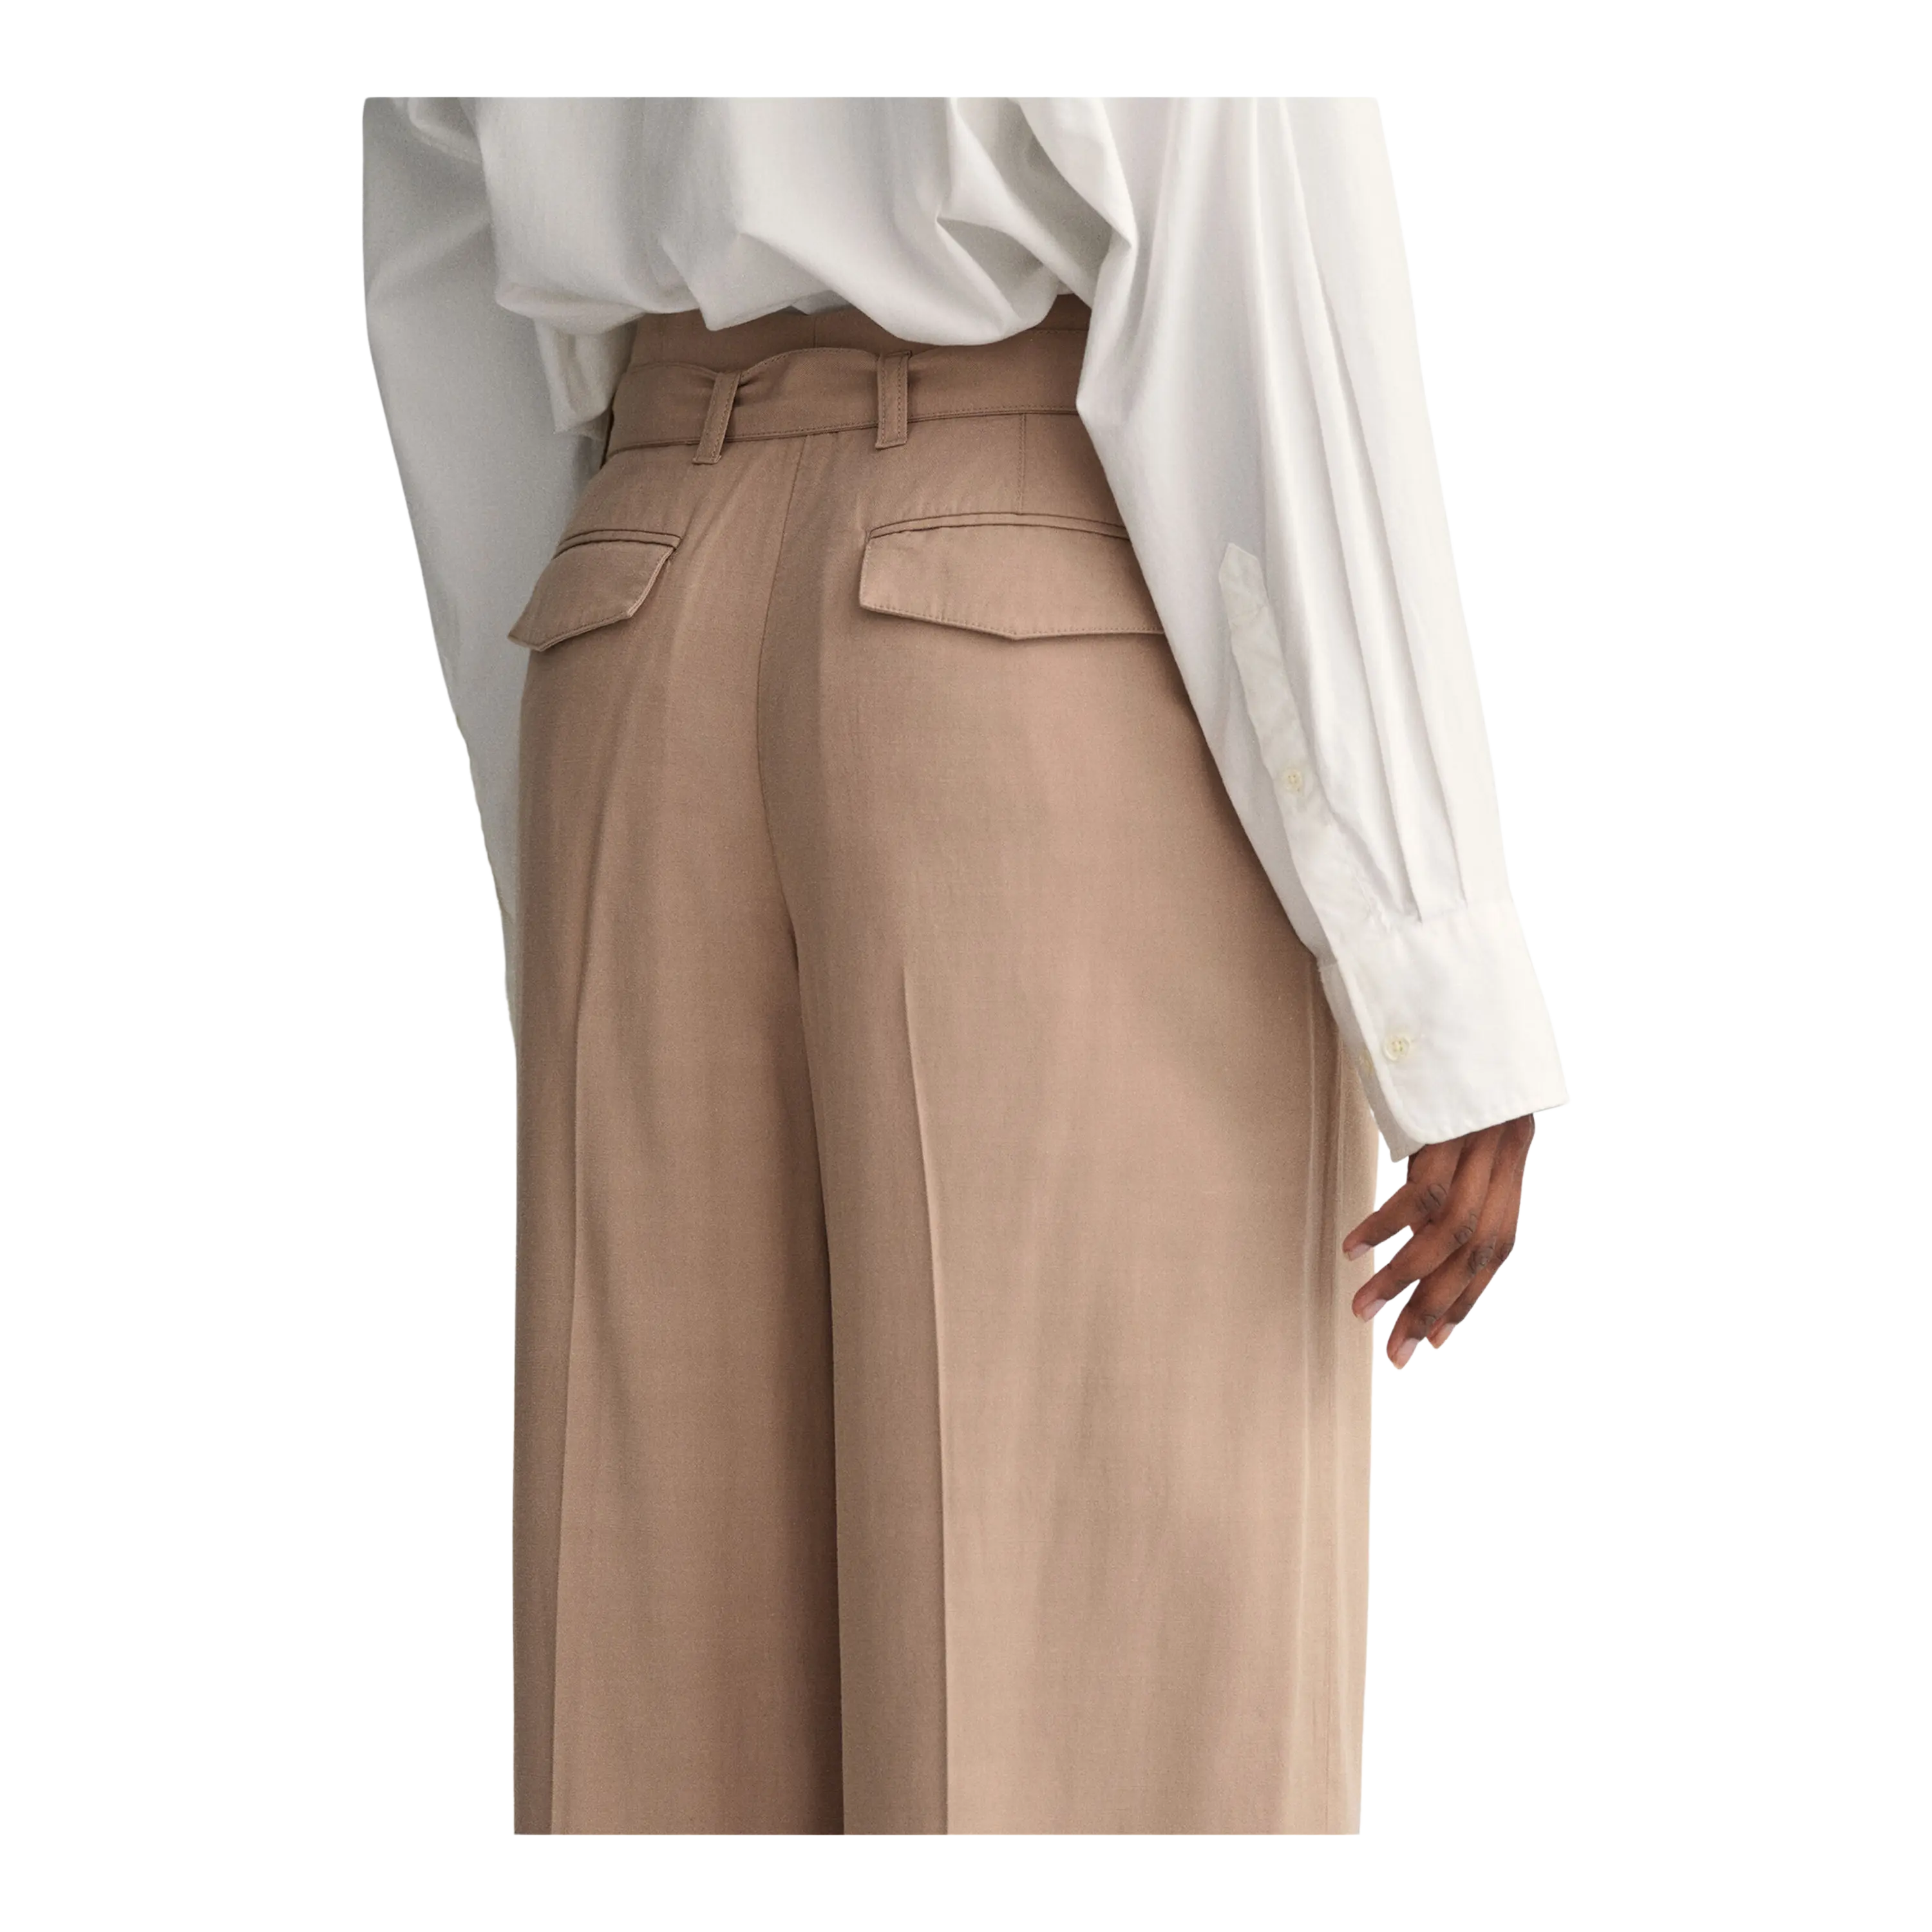 Belted Pants for Women